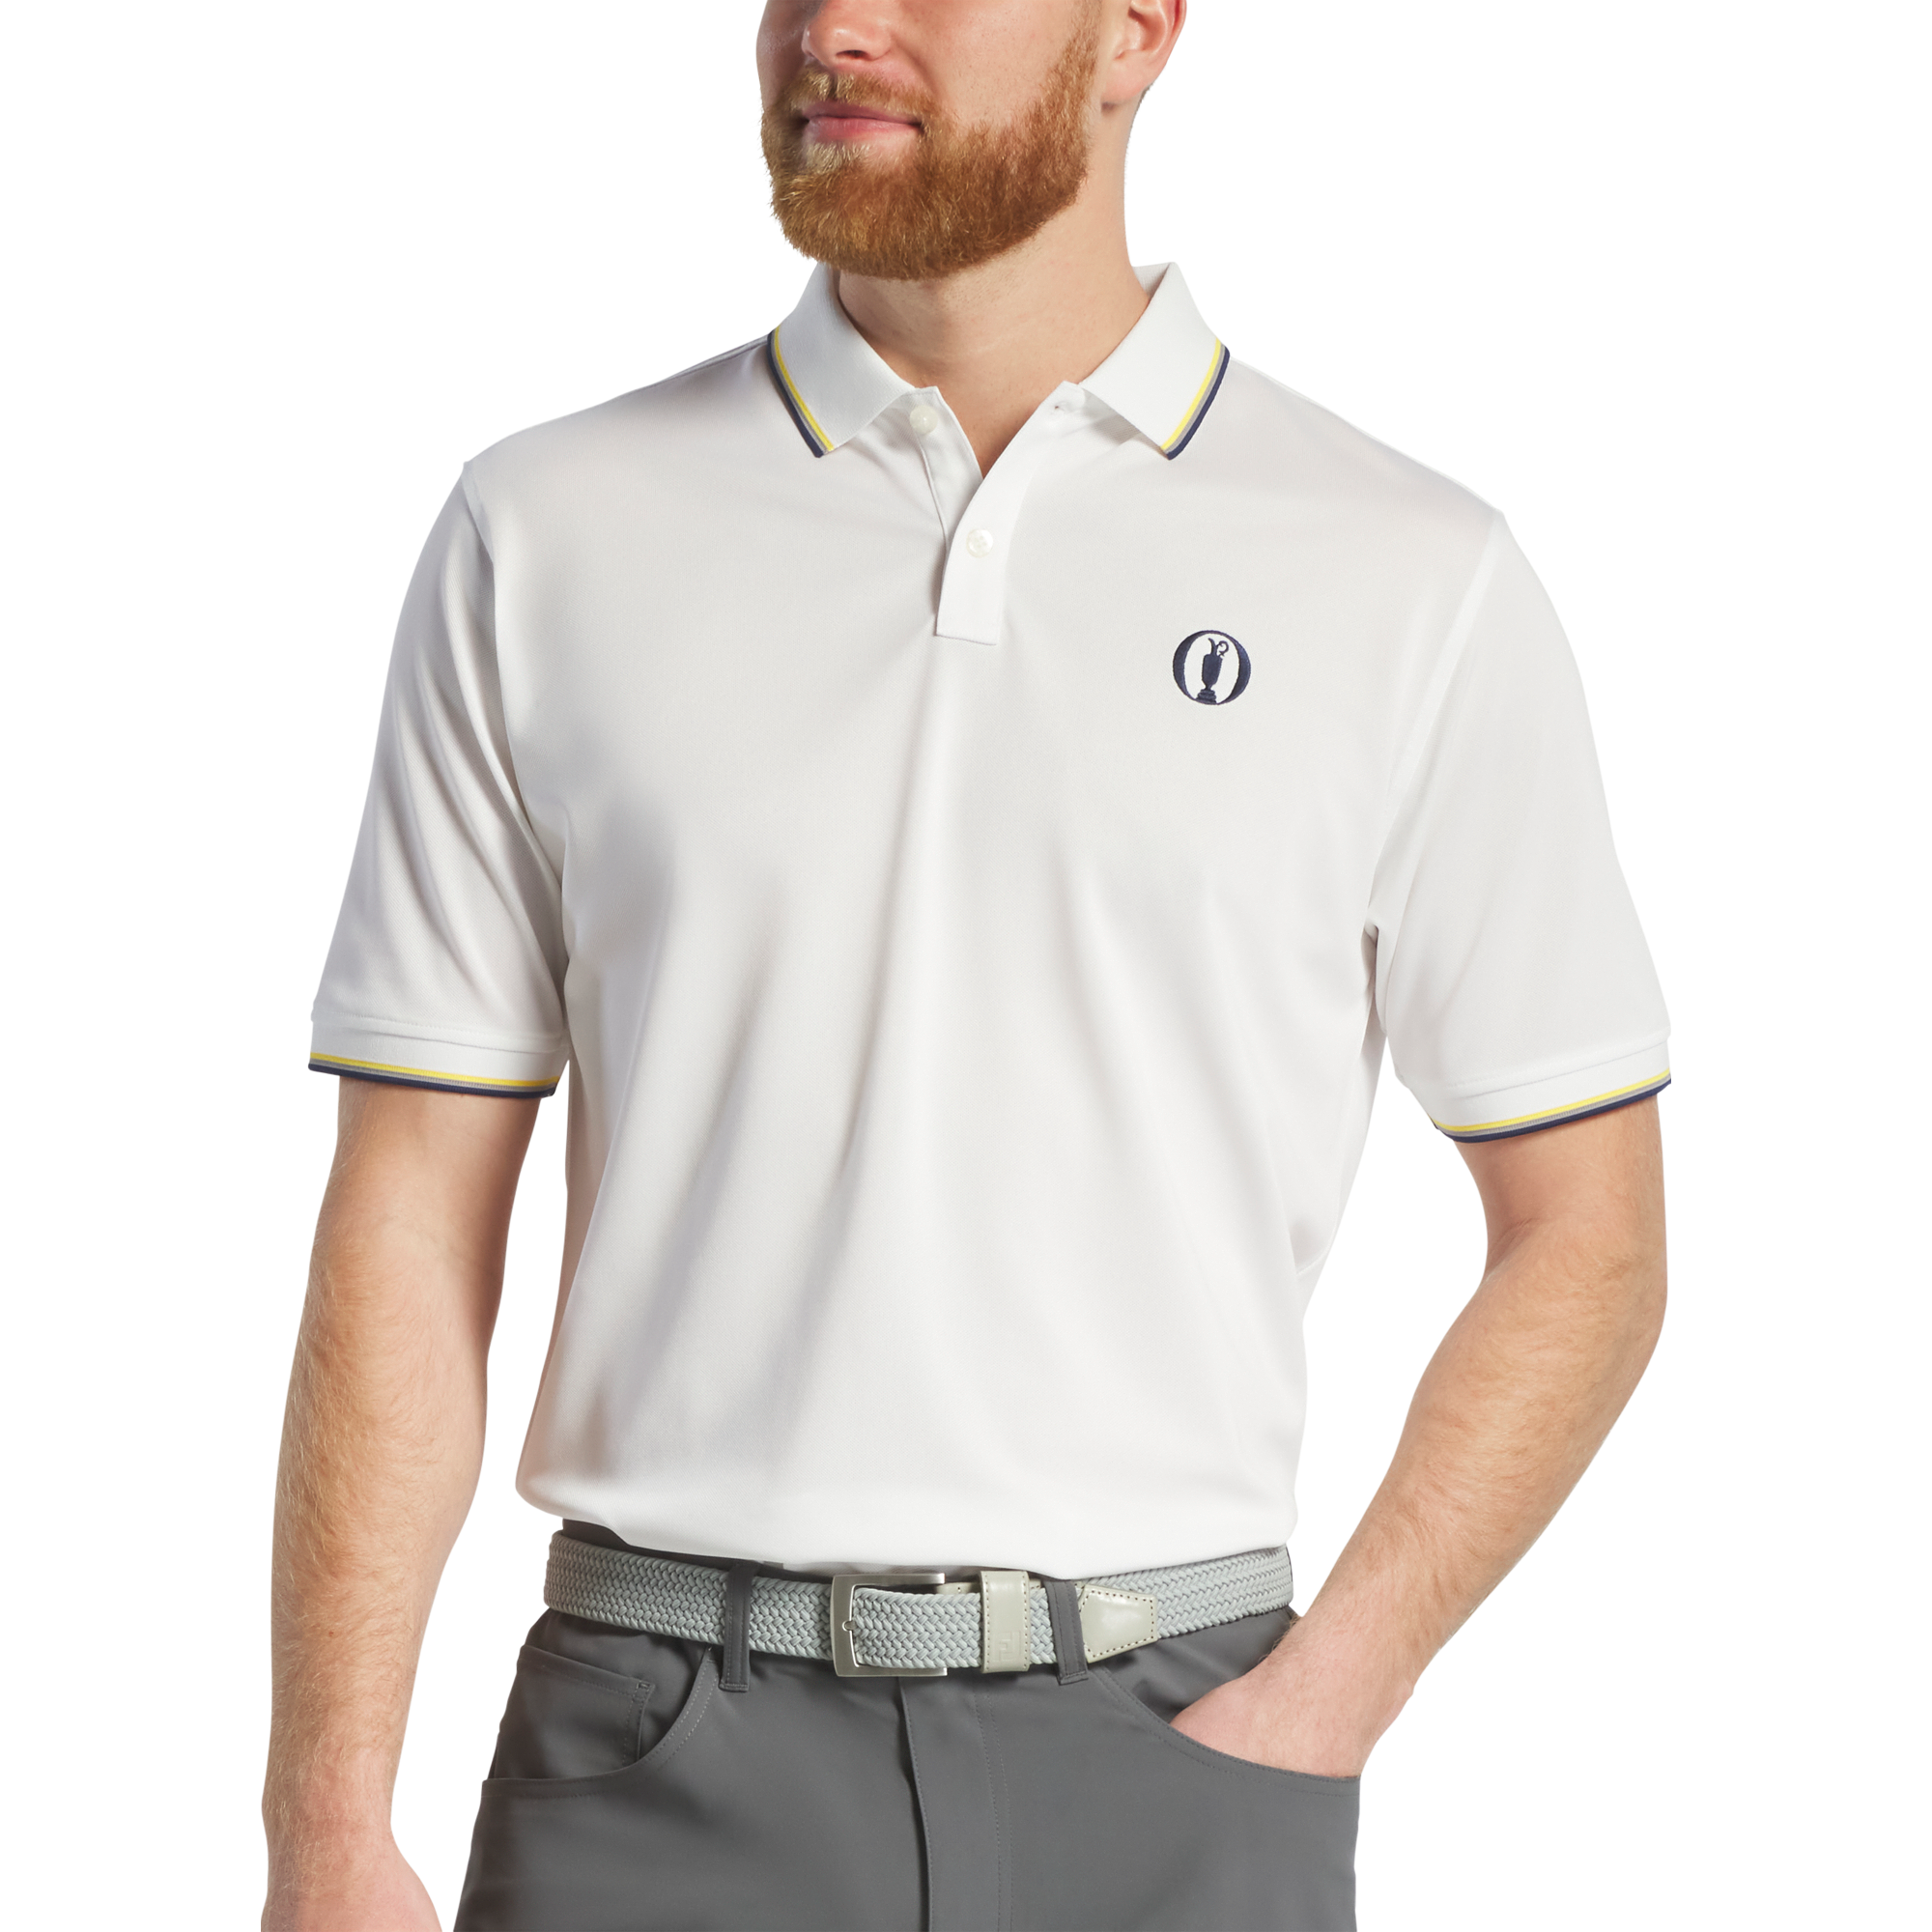 152nd Open Championship Solid with Trim Pique Shirt